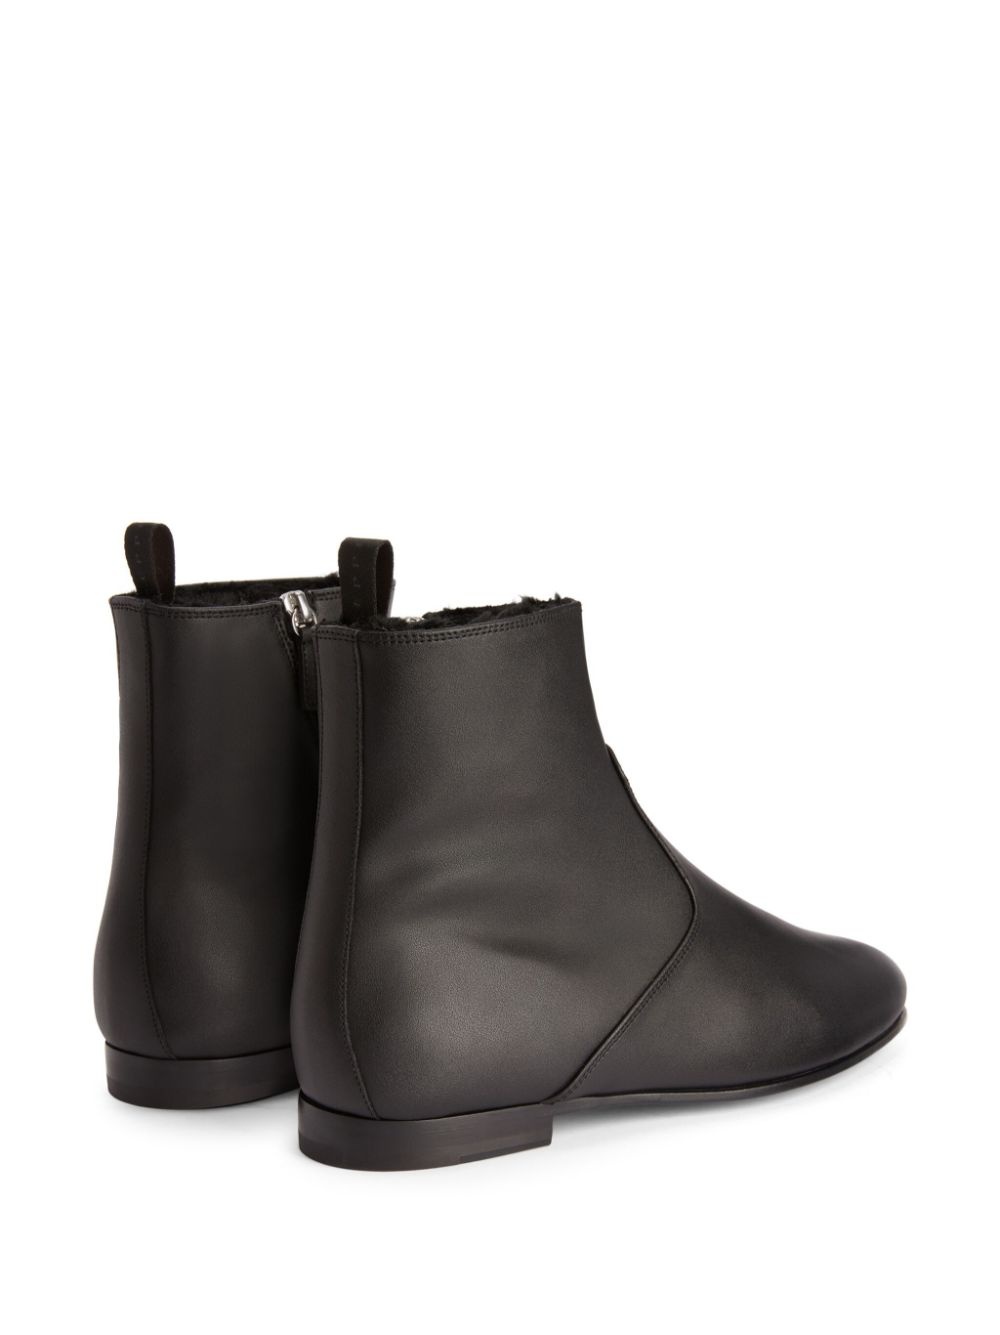 Ron leather ankle boots - 3